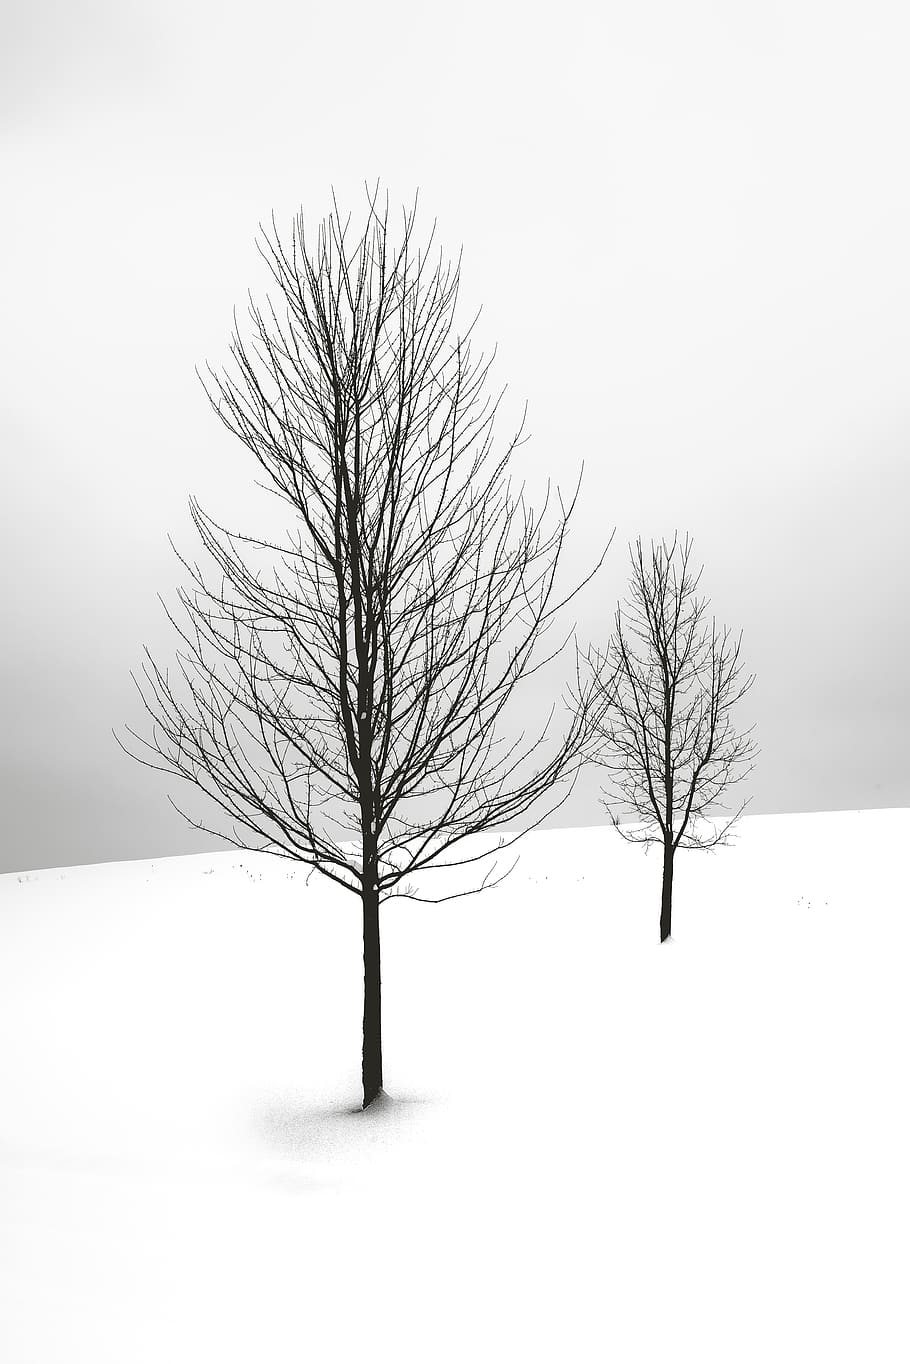 Two Bare Trees, black and white, cold, daylight, daytime, environment